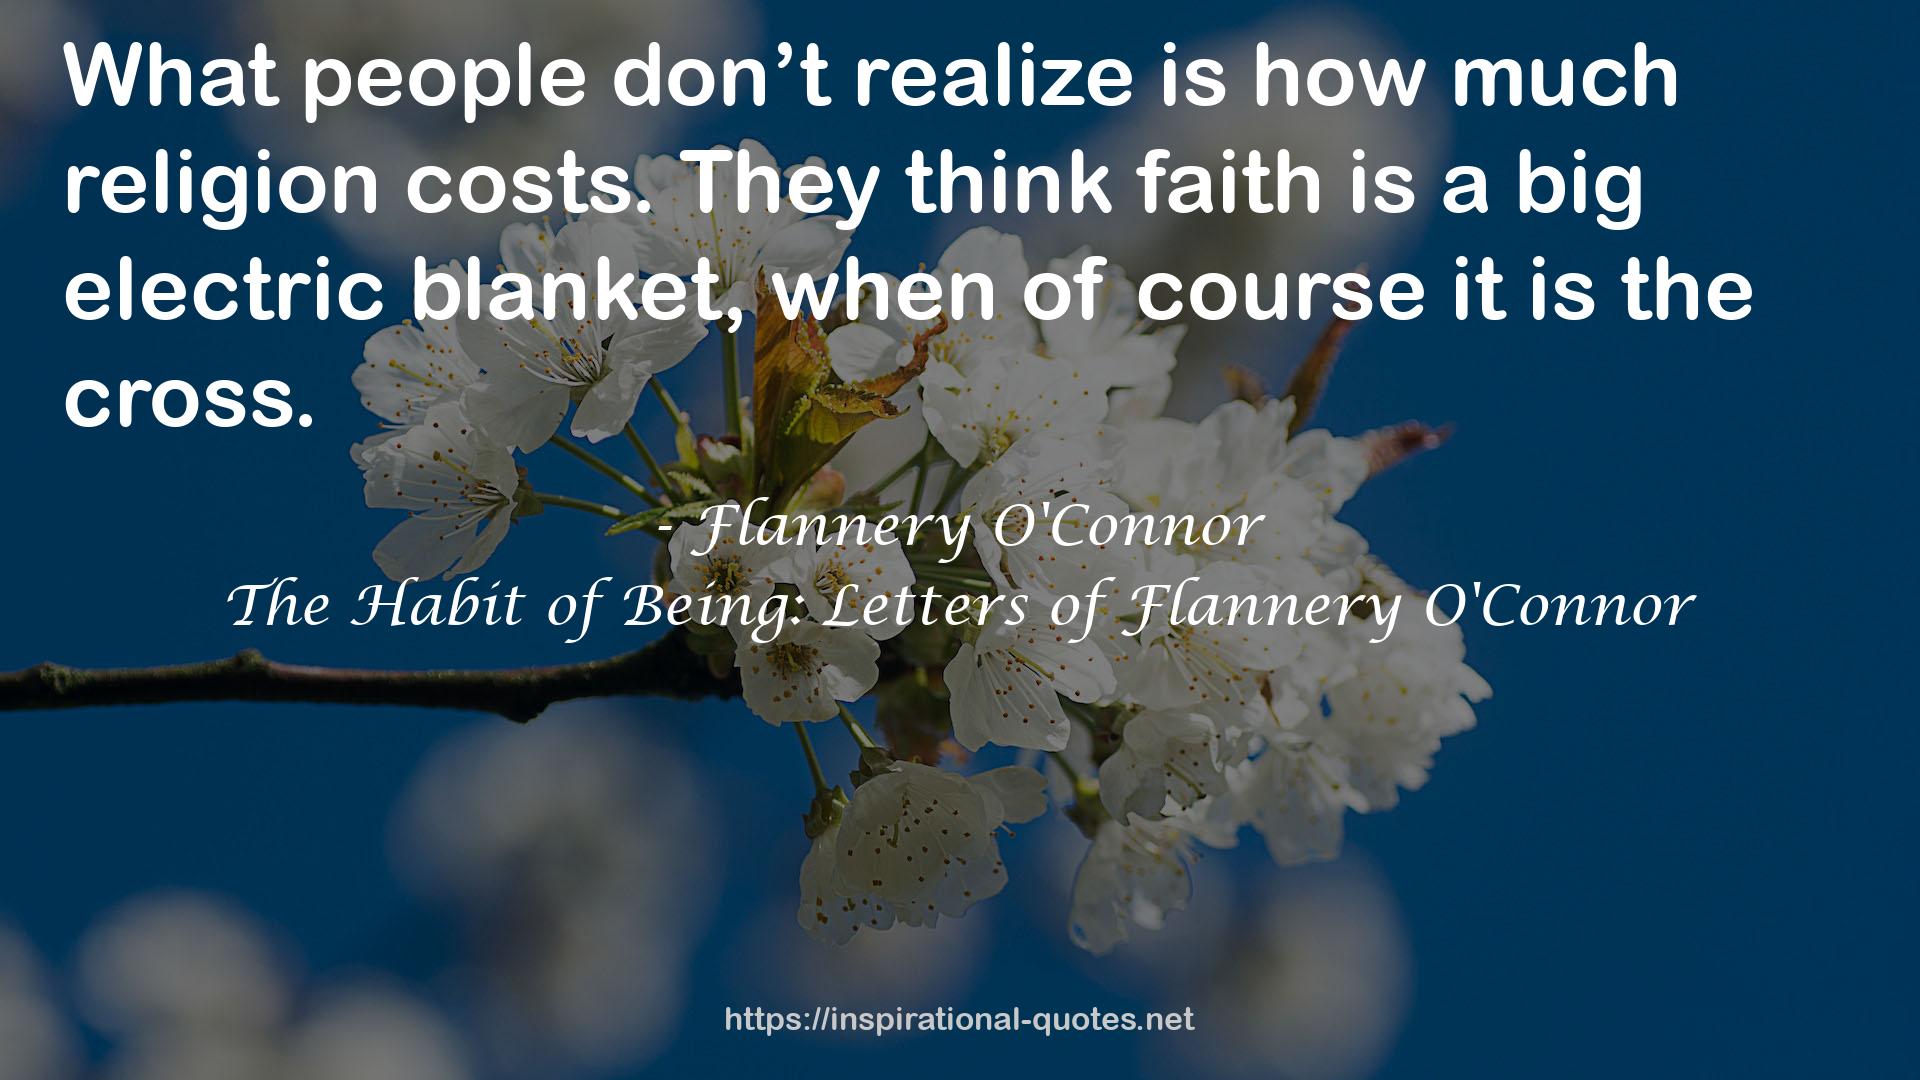 Flannery O'Connor QUOTES